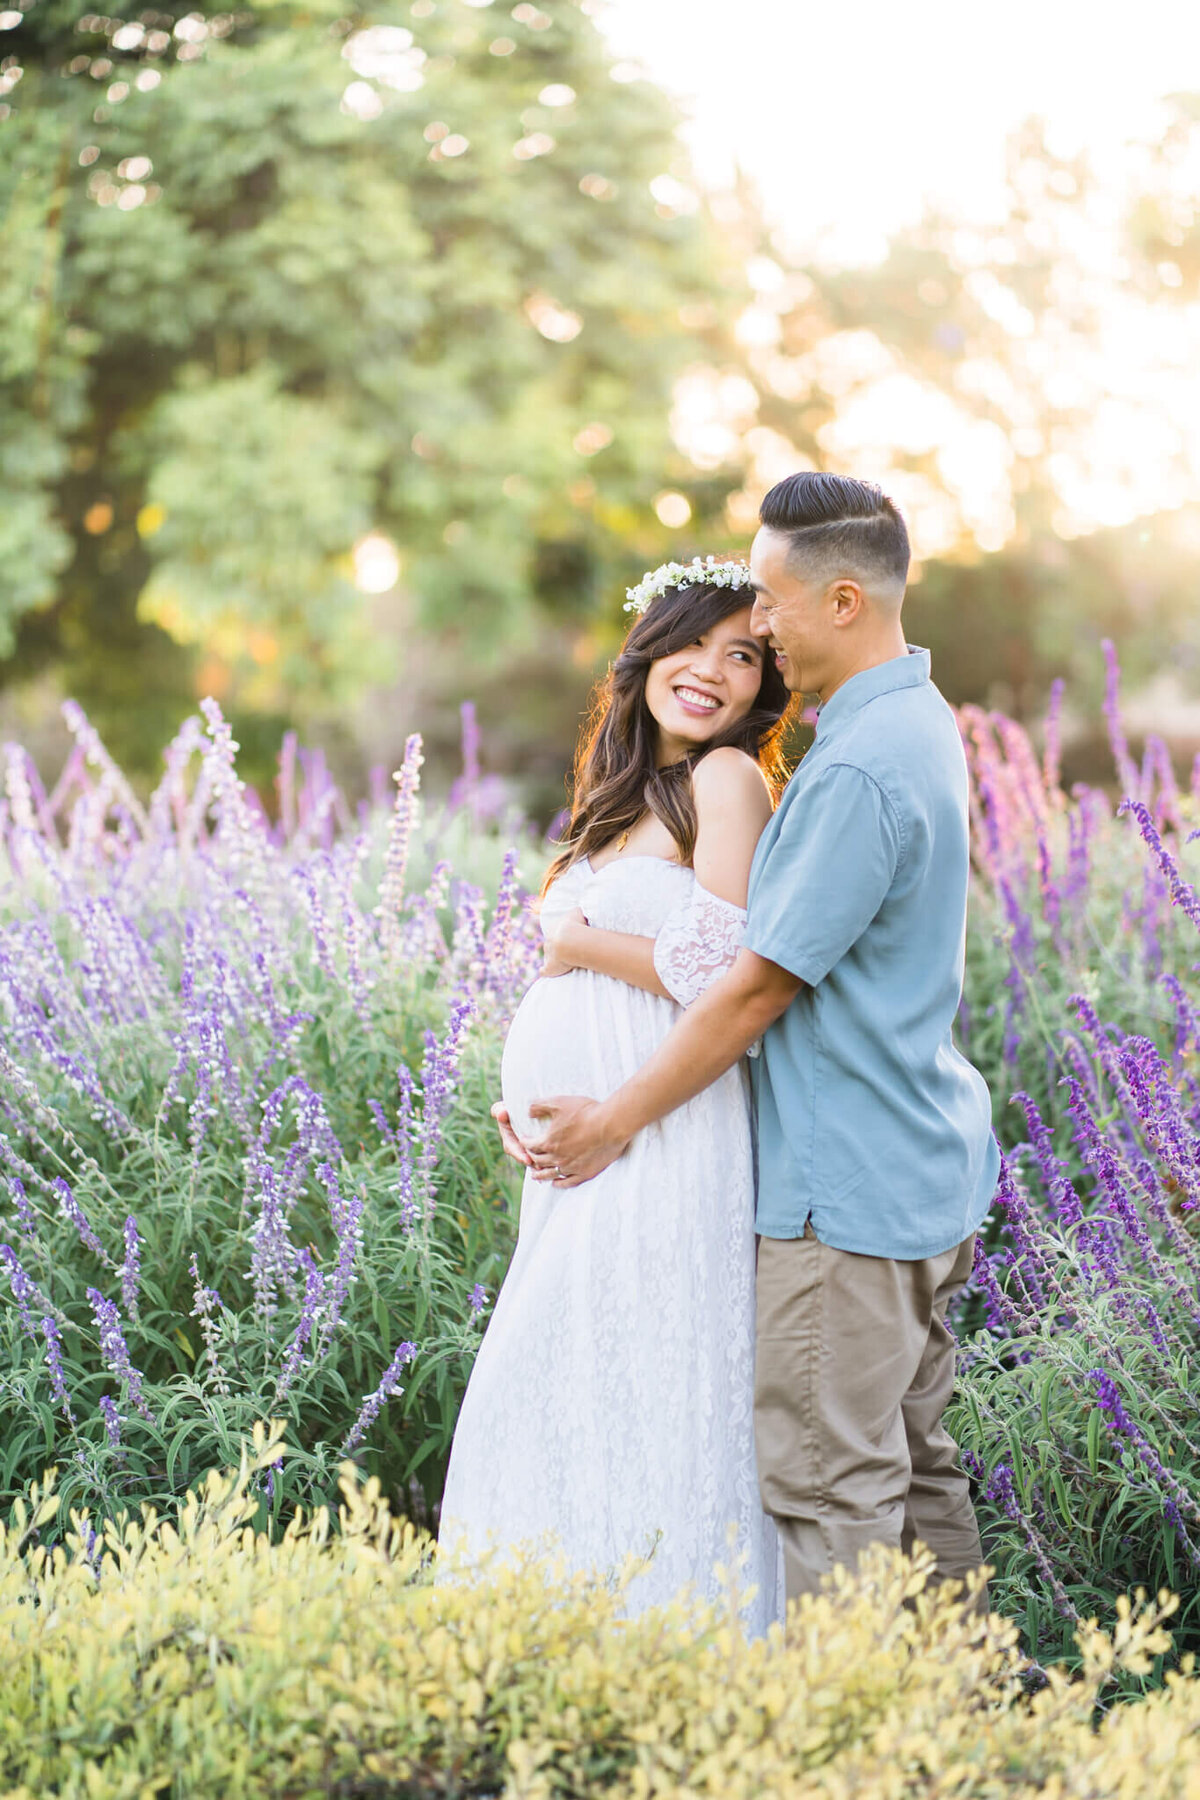 Pregnant couple hugging in a field of purple flowers with white flower wreath at golden hour